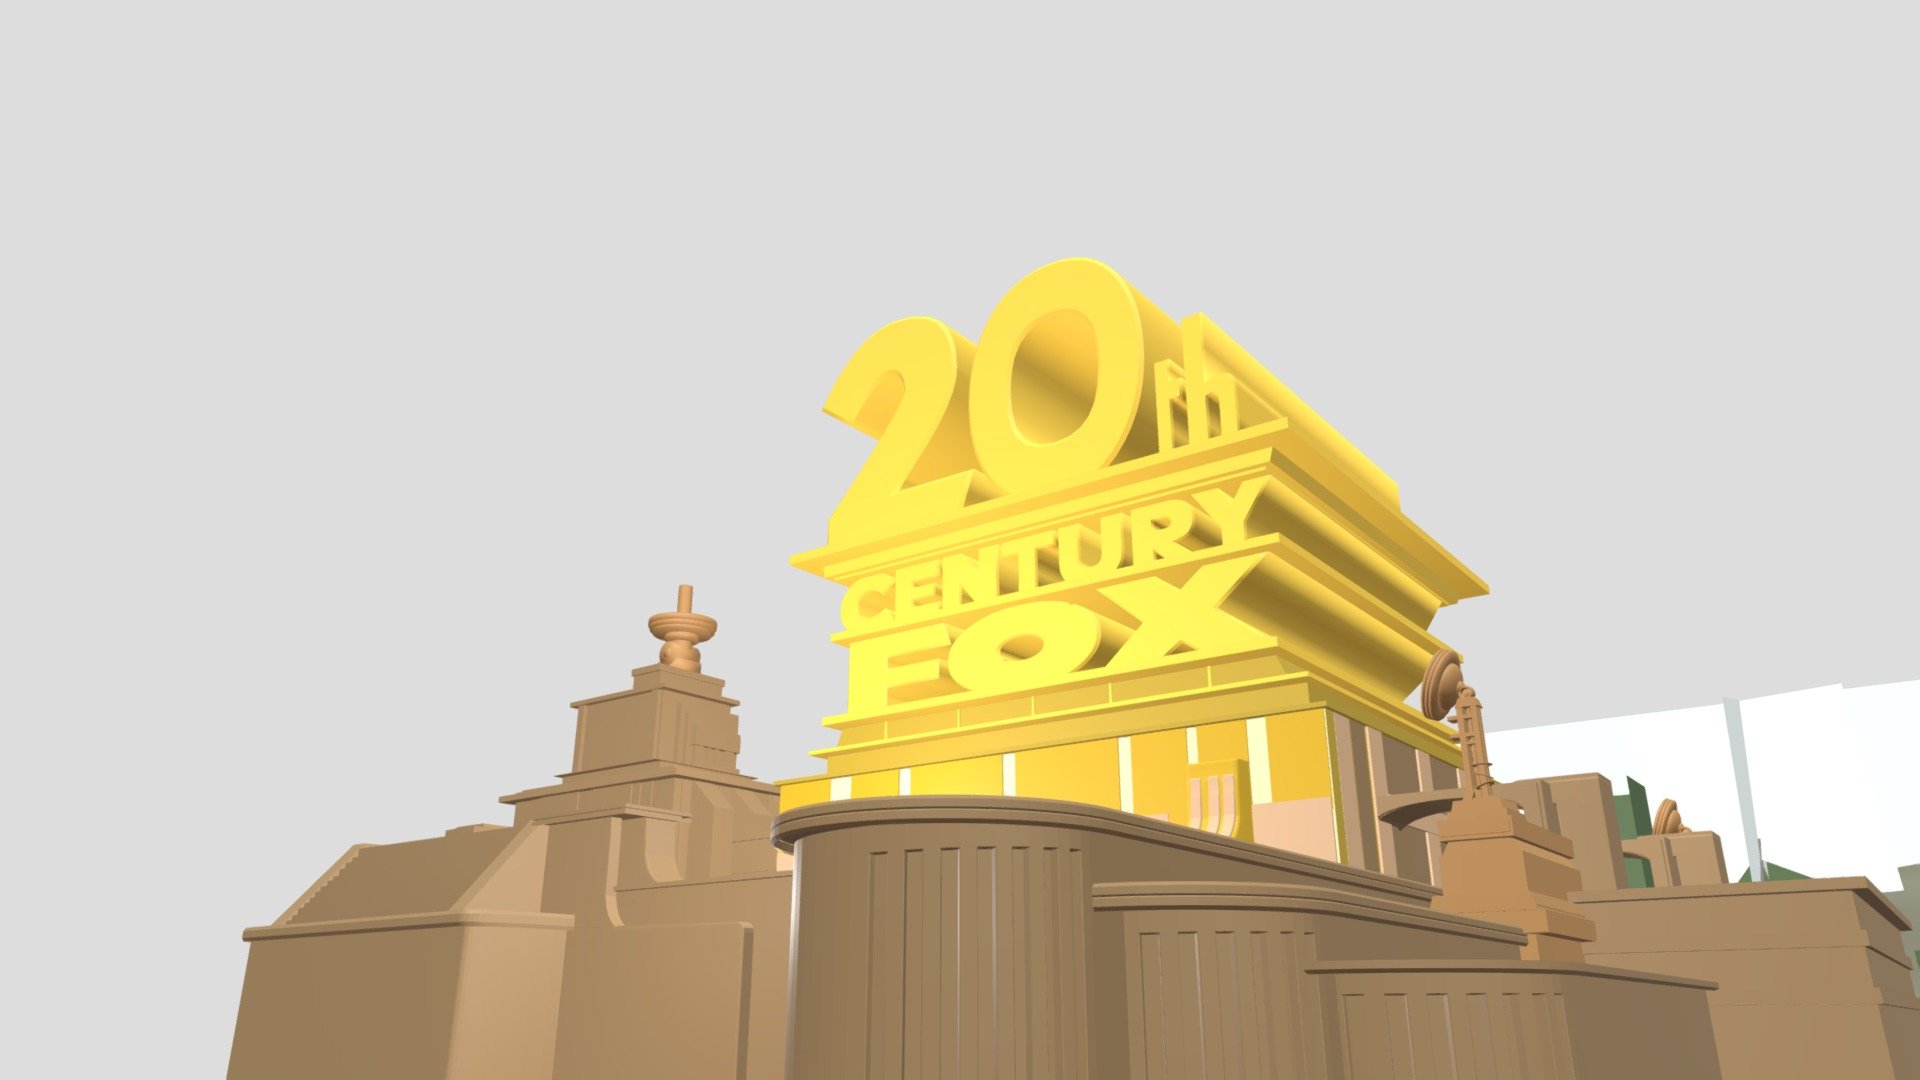 20th-Century-Fox-Logo-PNG-Picture 3d-ified (F2U) by HM1000 on